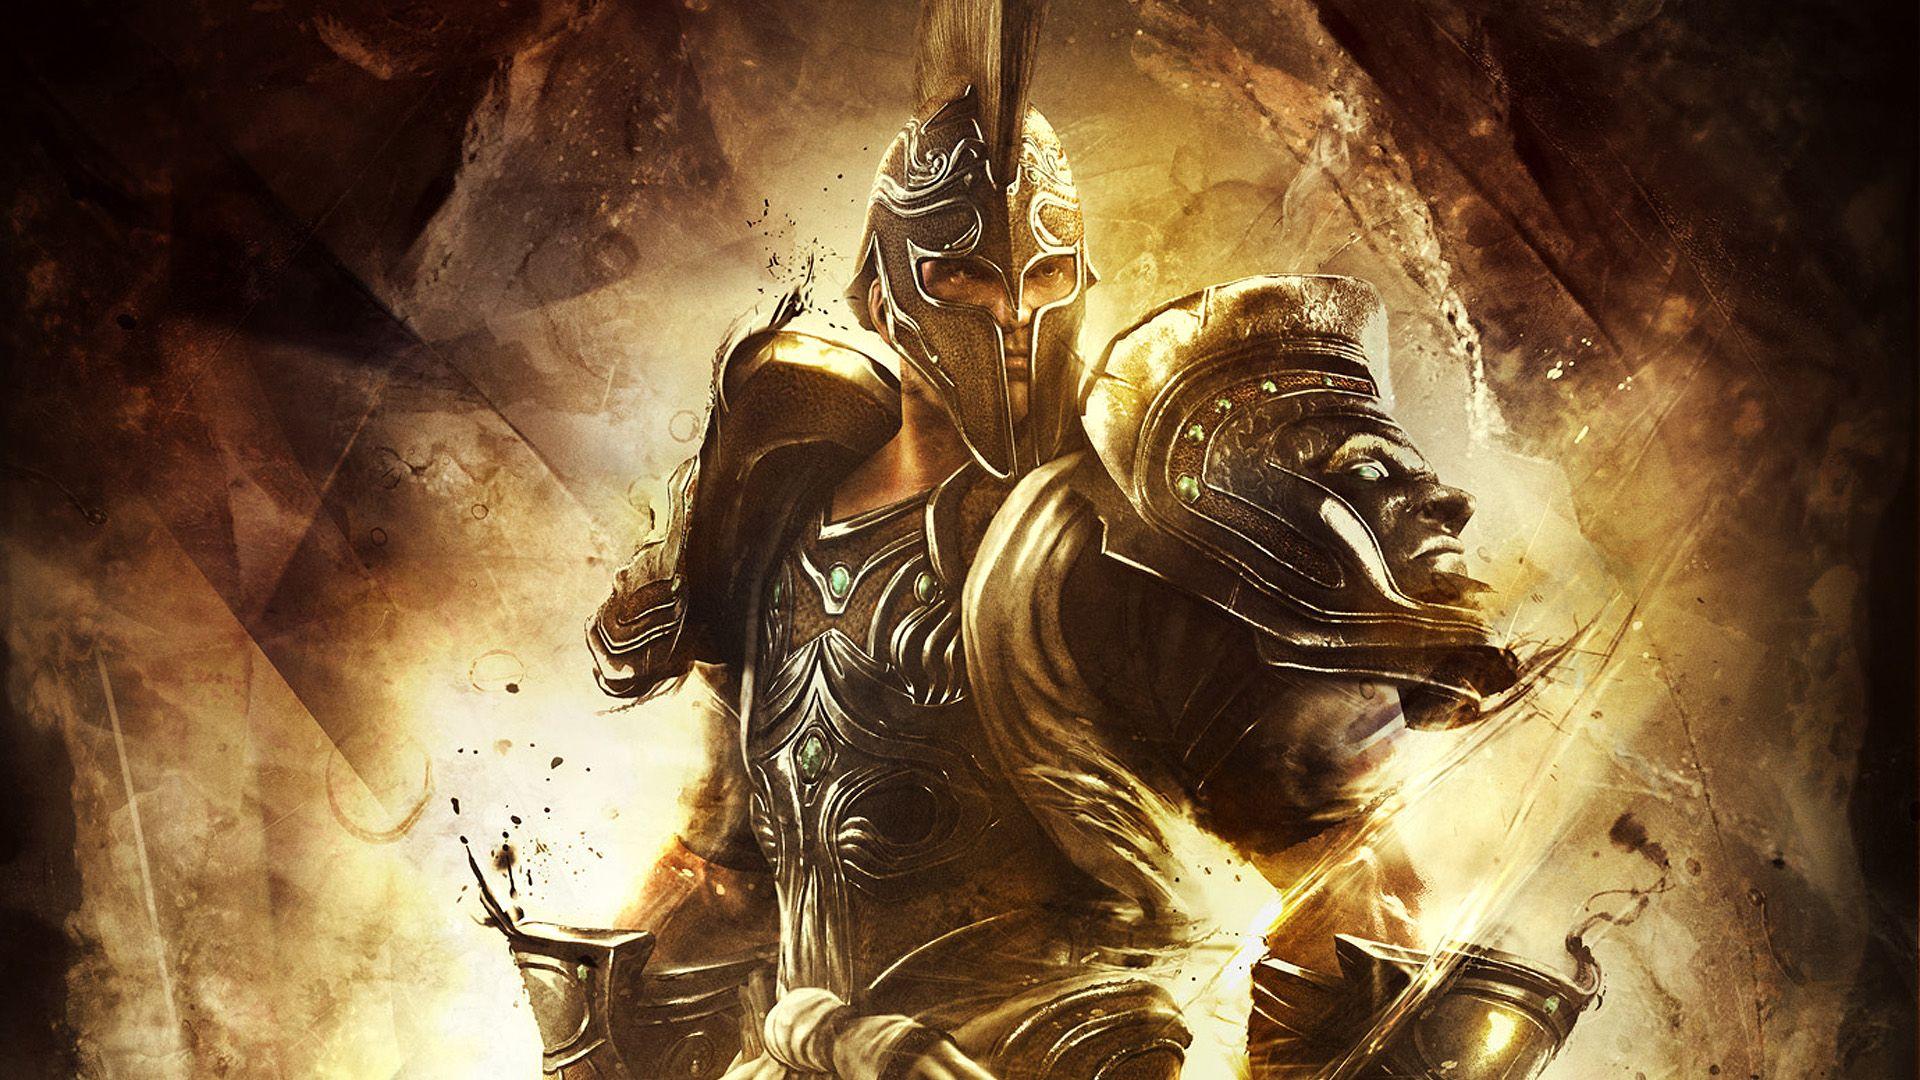 Ares God of War Wallpapers - Top Free Ares God of War Backgrounds